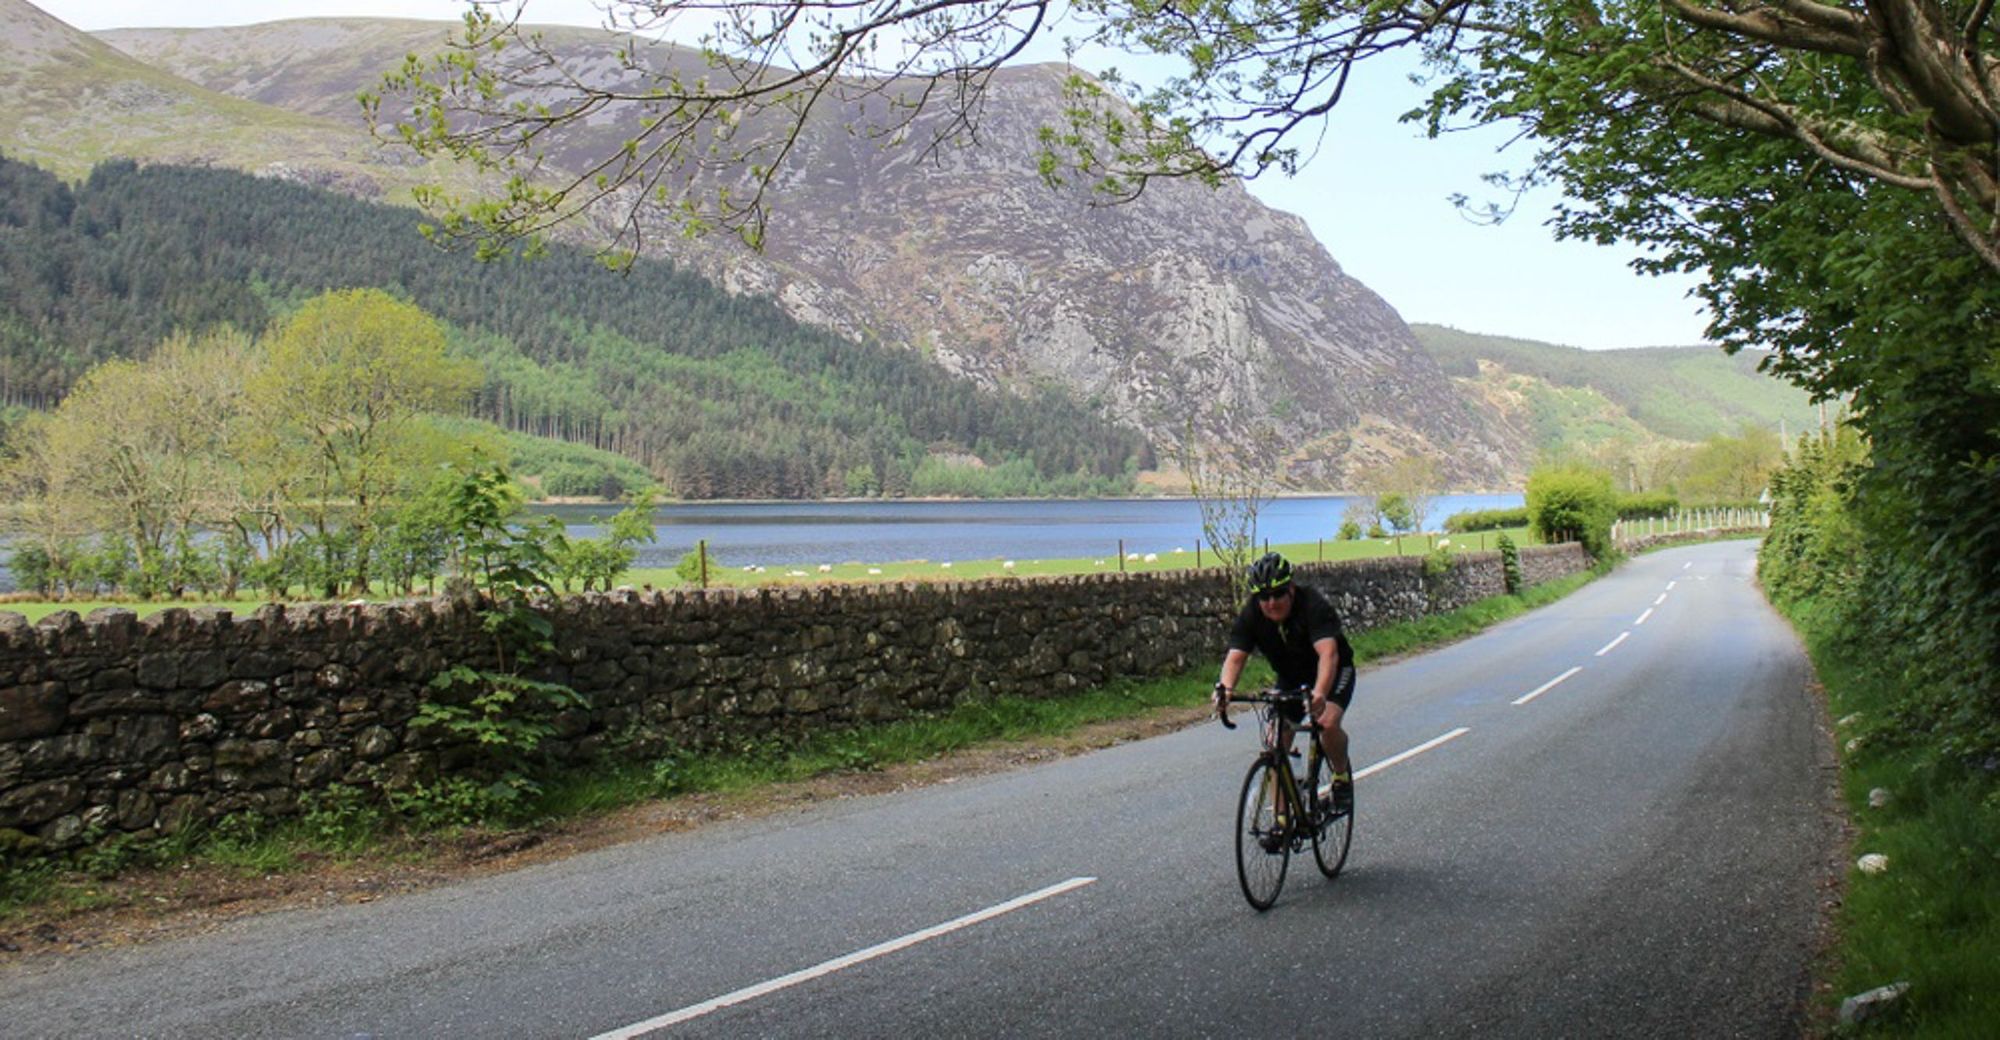 A cyclist on a rural road in Snowdonia national park